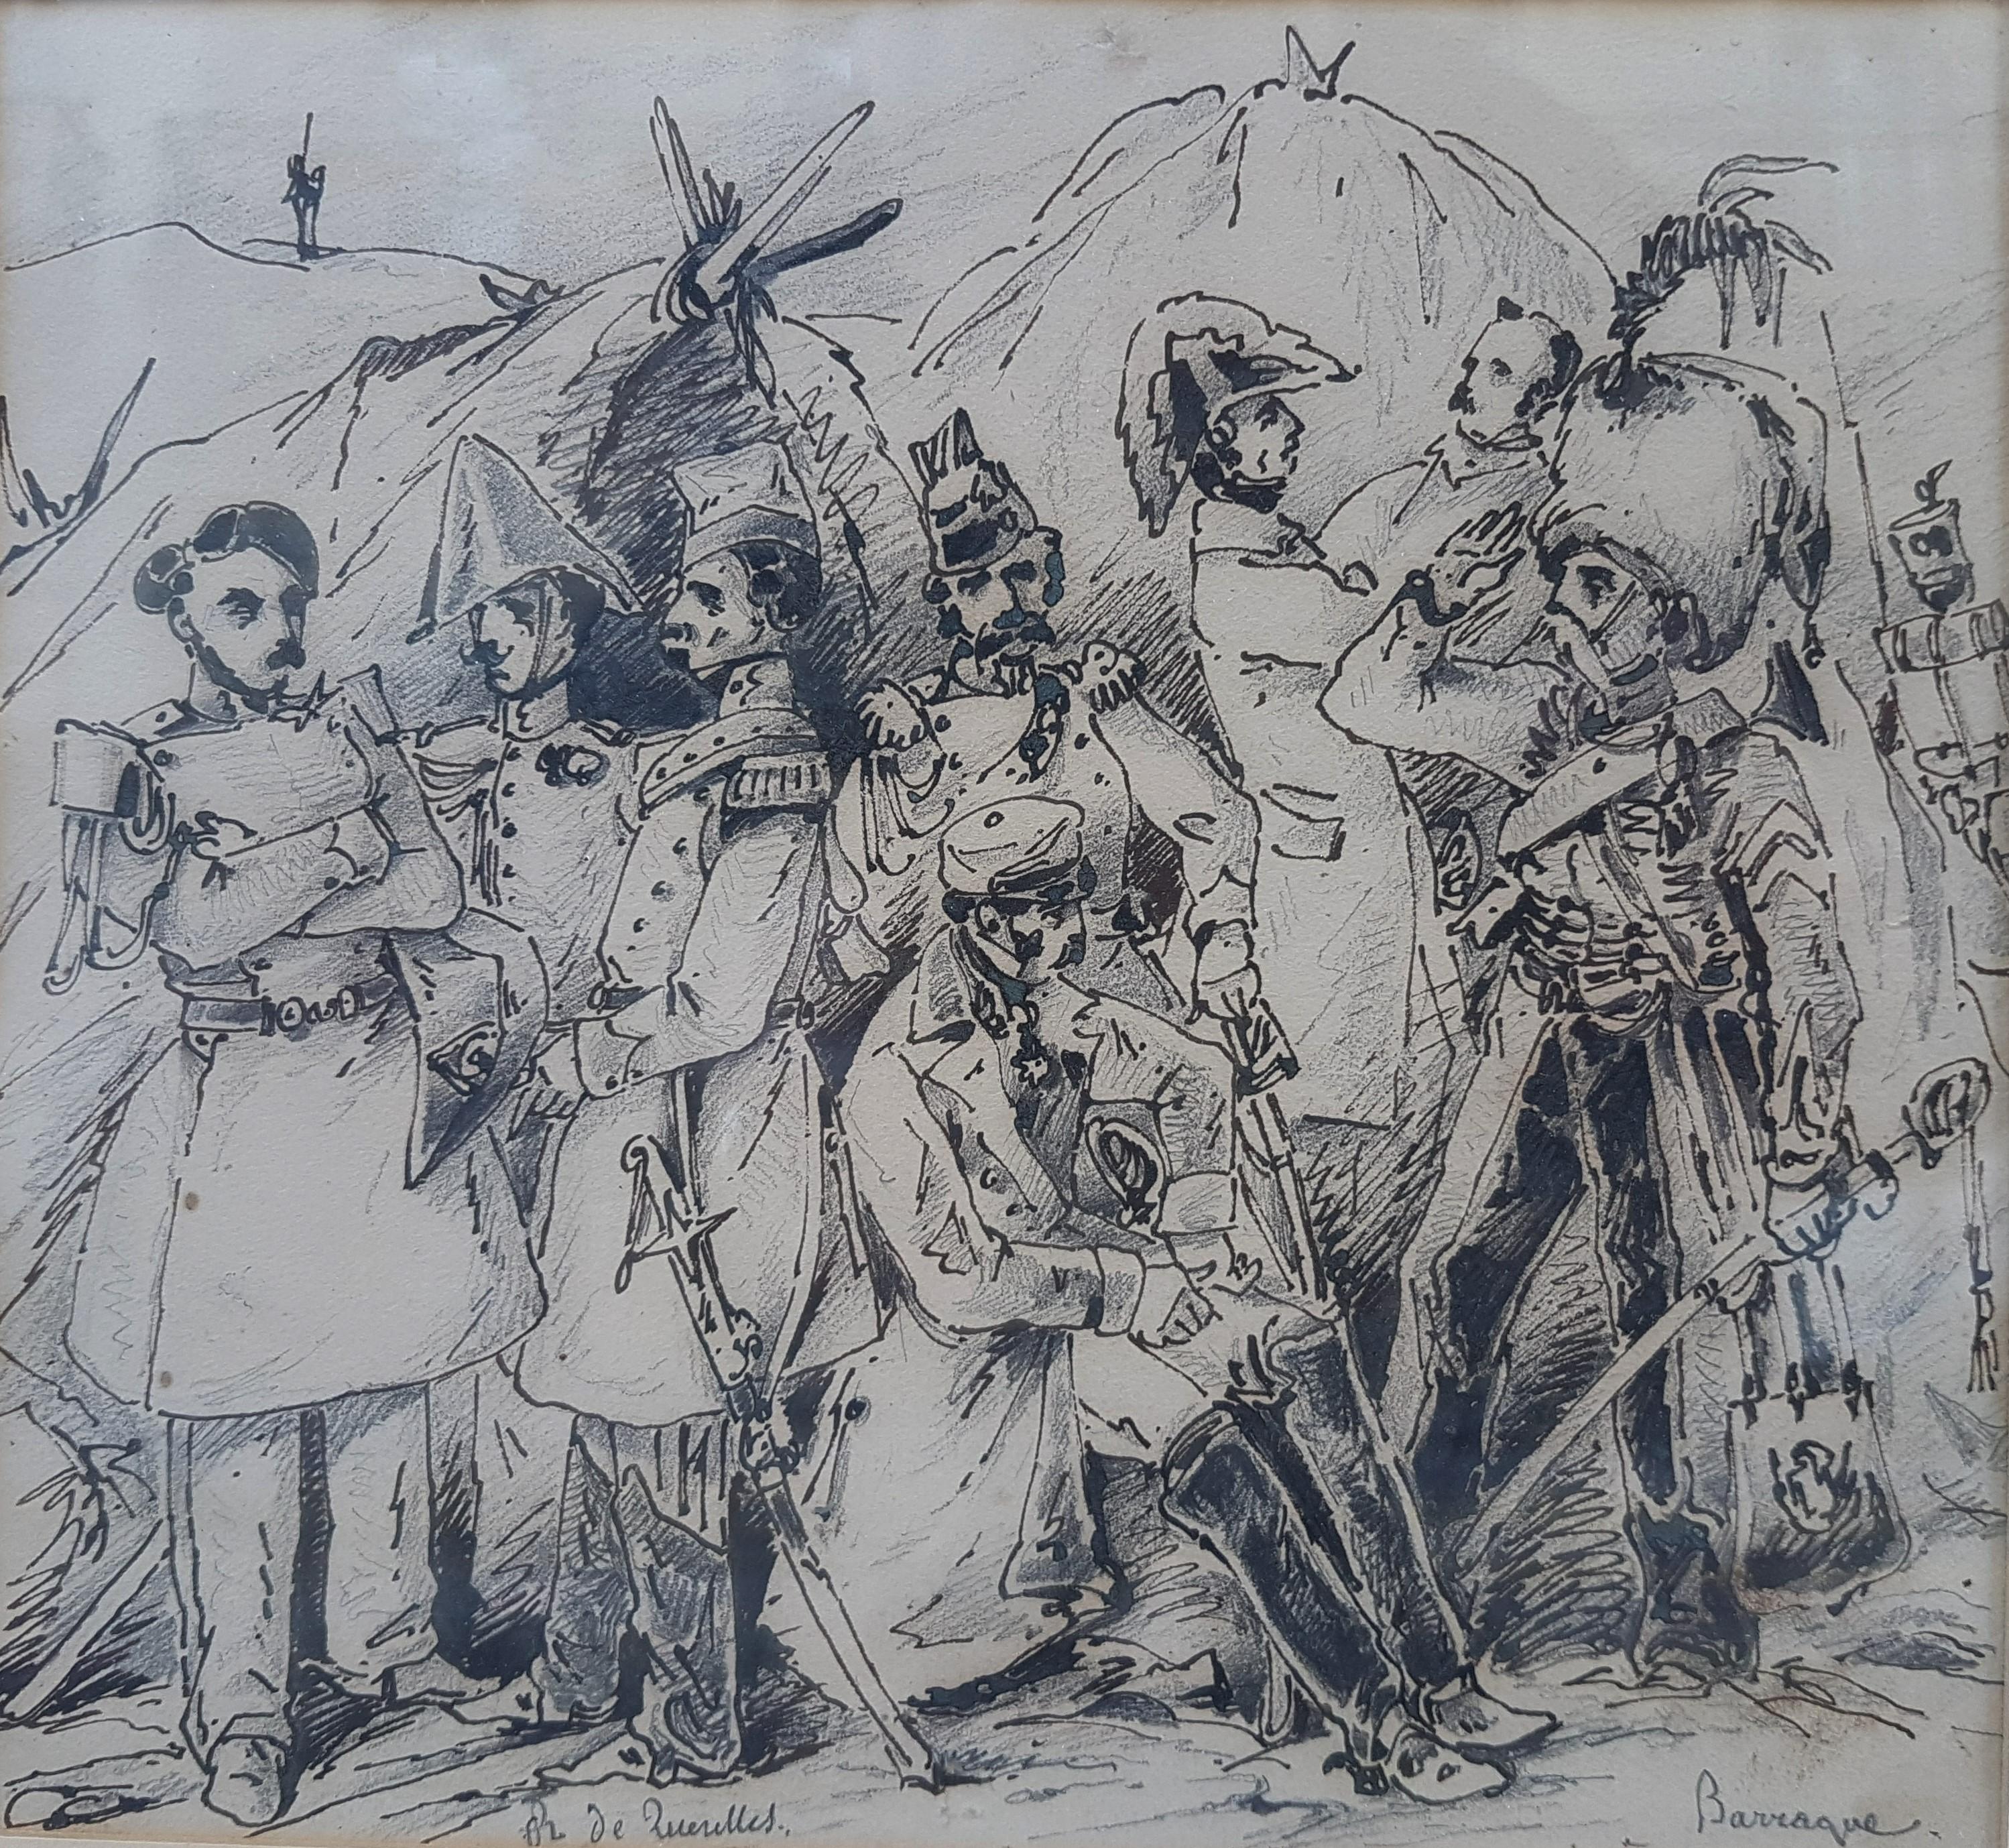 Military Drawing 19th Ink on paper Souvenir barrack officers 1830 July Monarchy  - Art by Richard de Querelle